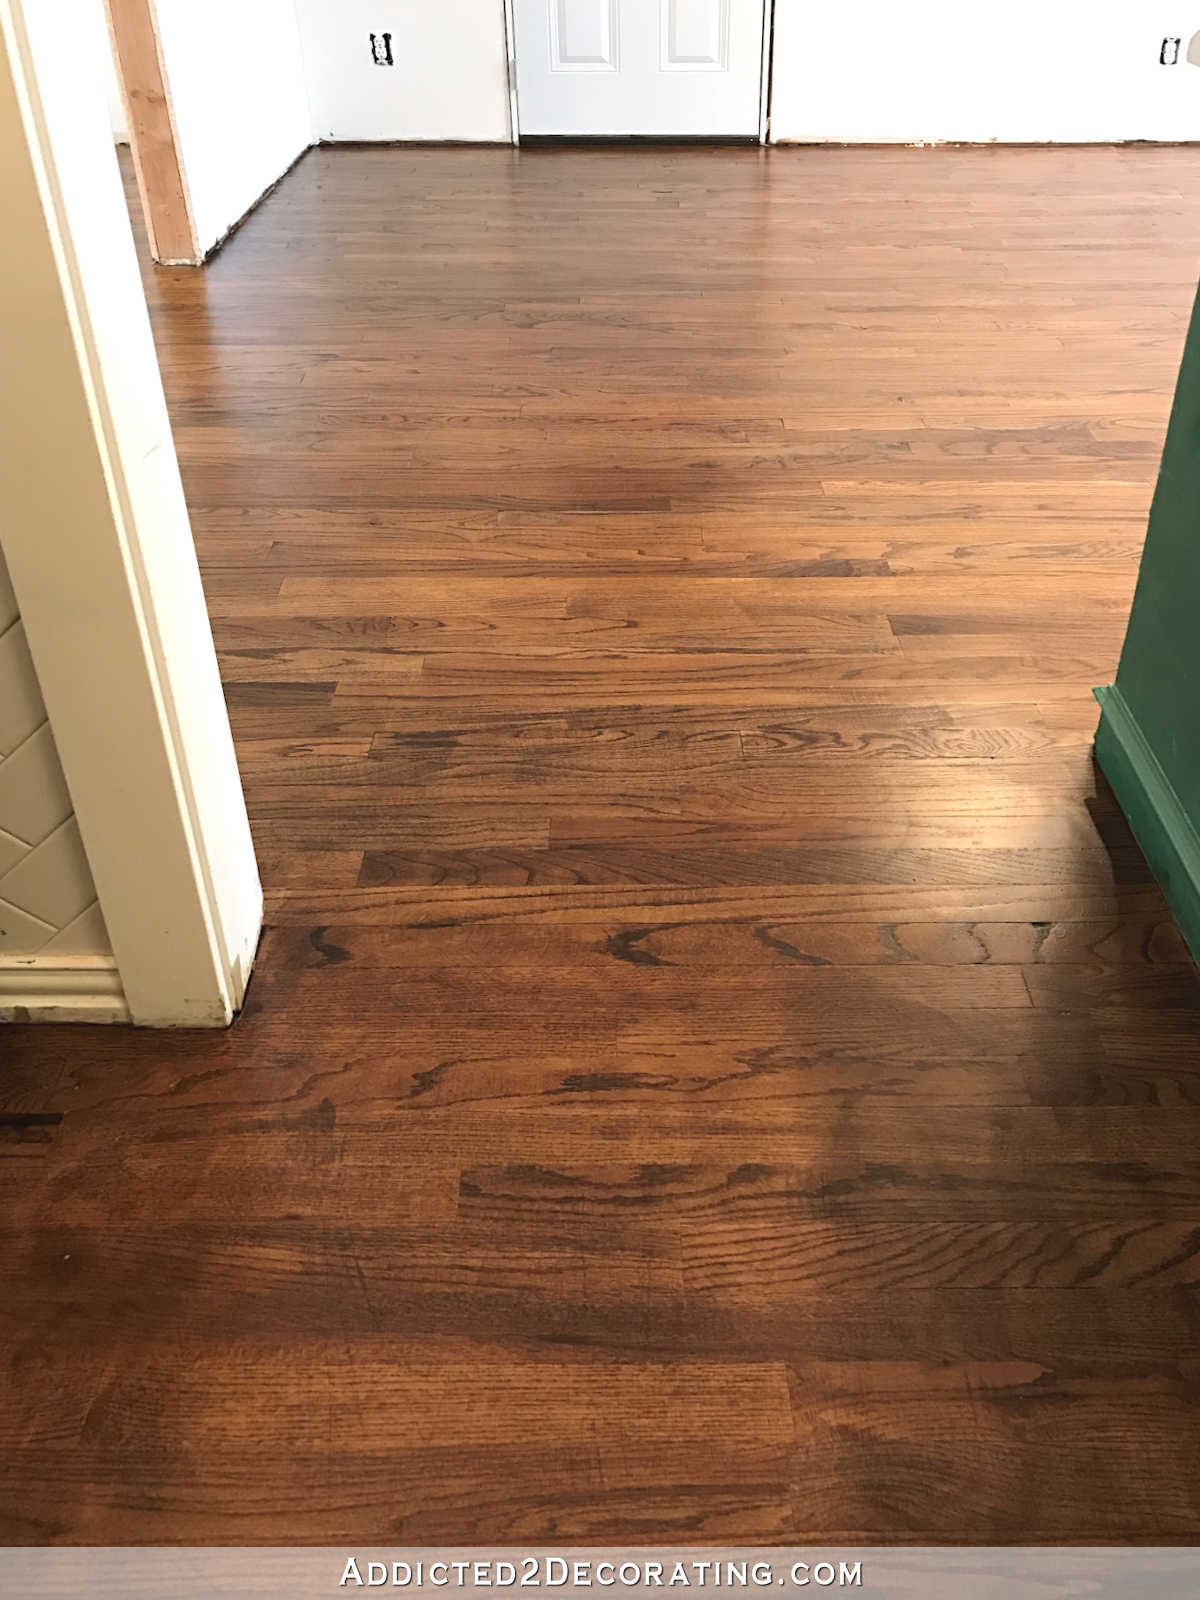 25 Nice How Much Does Restaining Hardwood Floors Cost 2022 free download how much does restaining hardwood floors cost of cost of refinishing wood floors will refinishingod floors pet stains throughout cost of refinishing wood floors hardwood floor cleaning how l